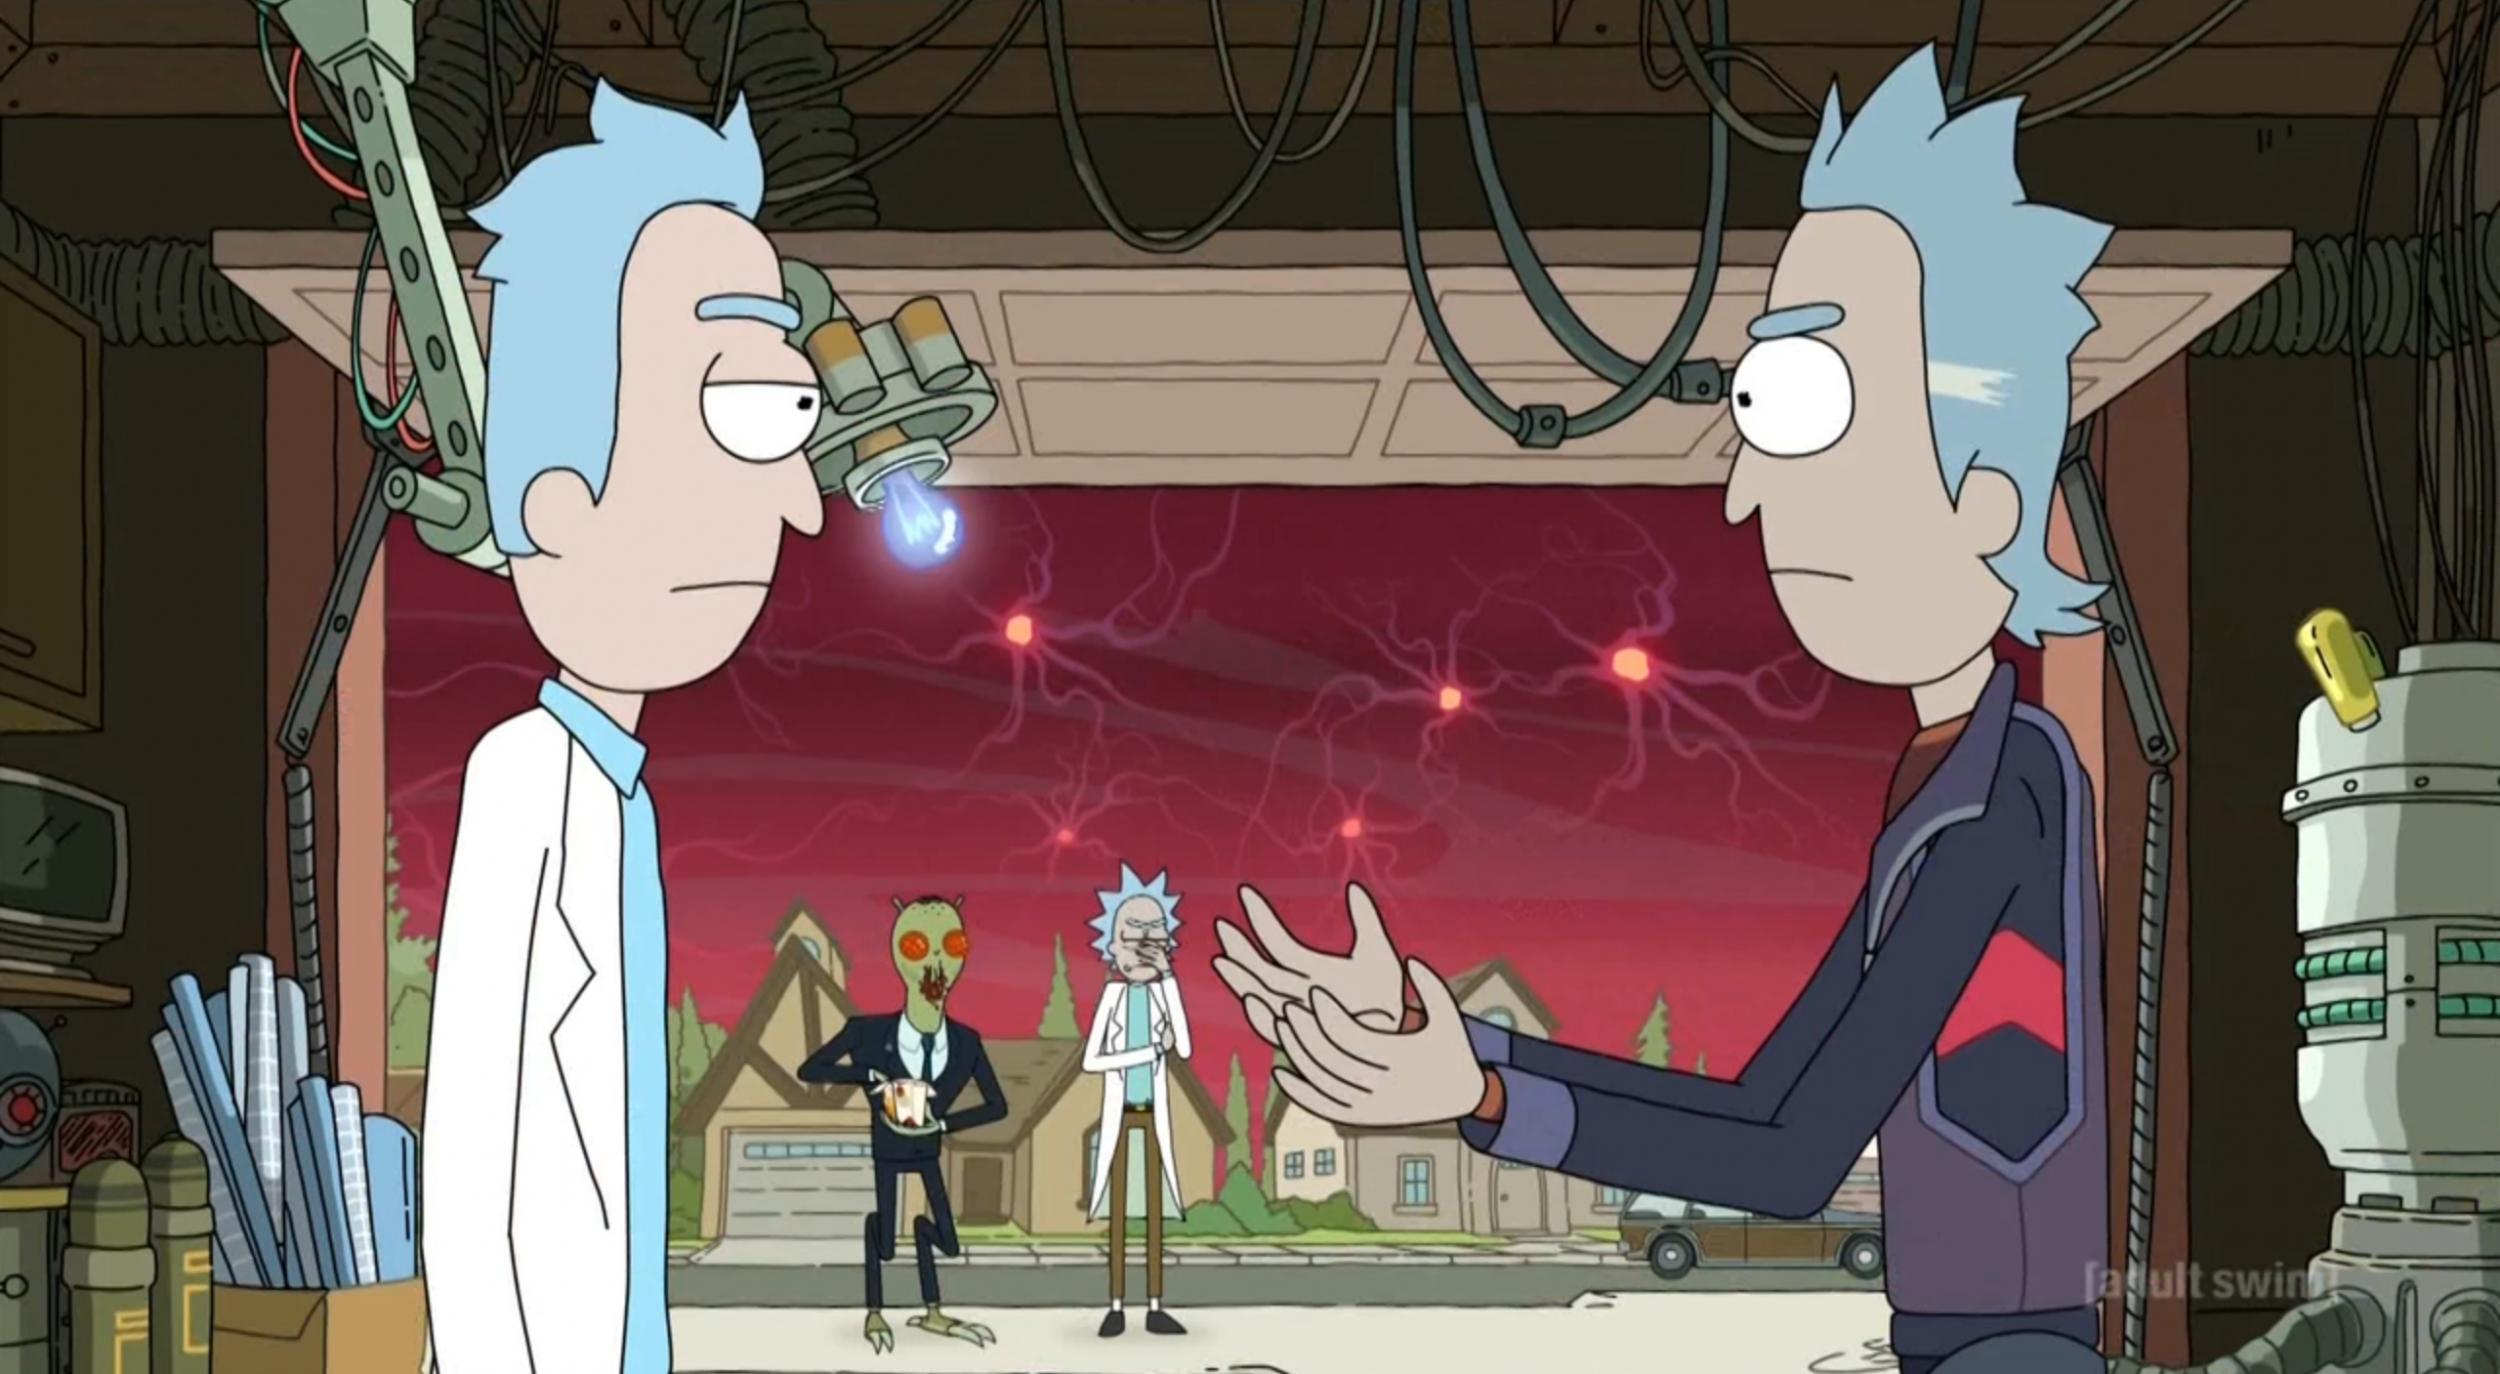 Rick and Morty season 3 episode 1 gets surprise release on April